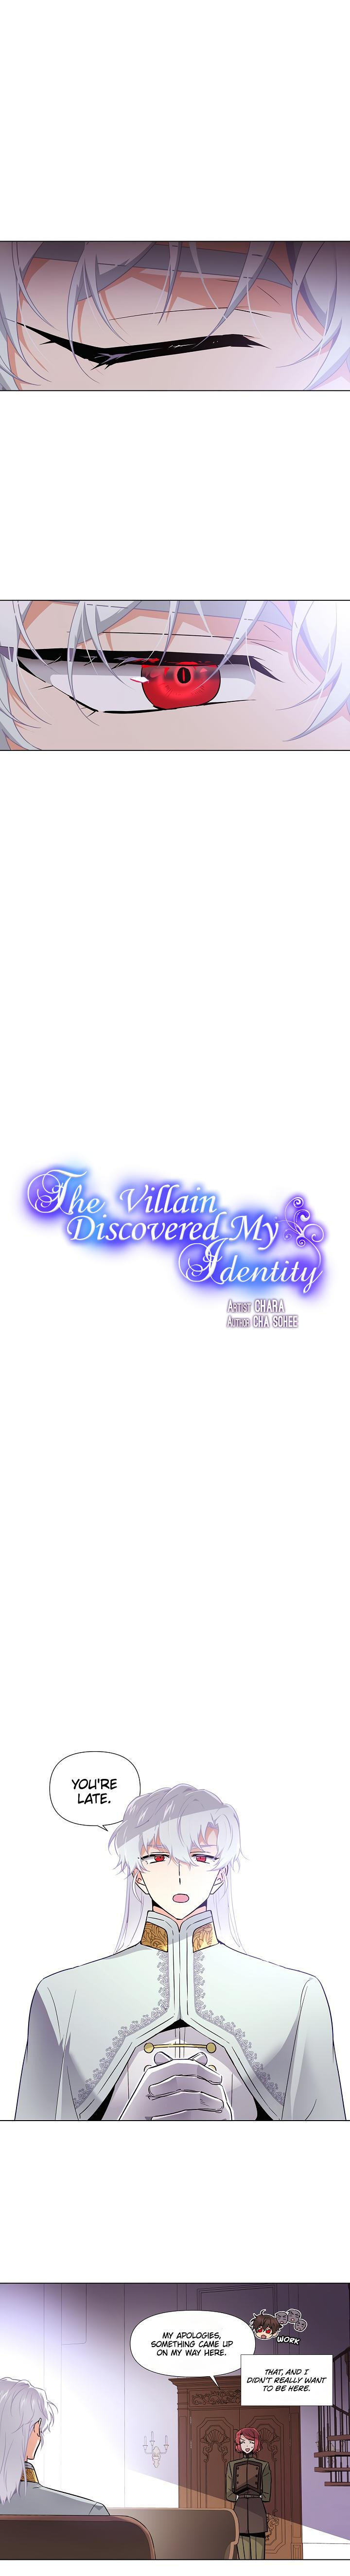 The Villain Discovered My Identity - Chapter 21 Page 3